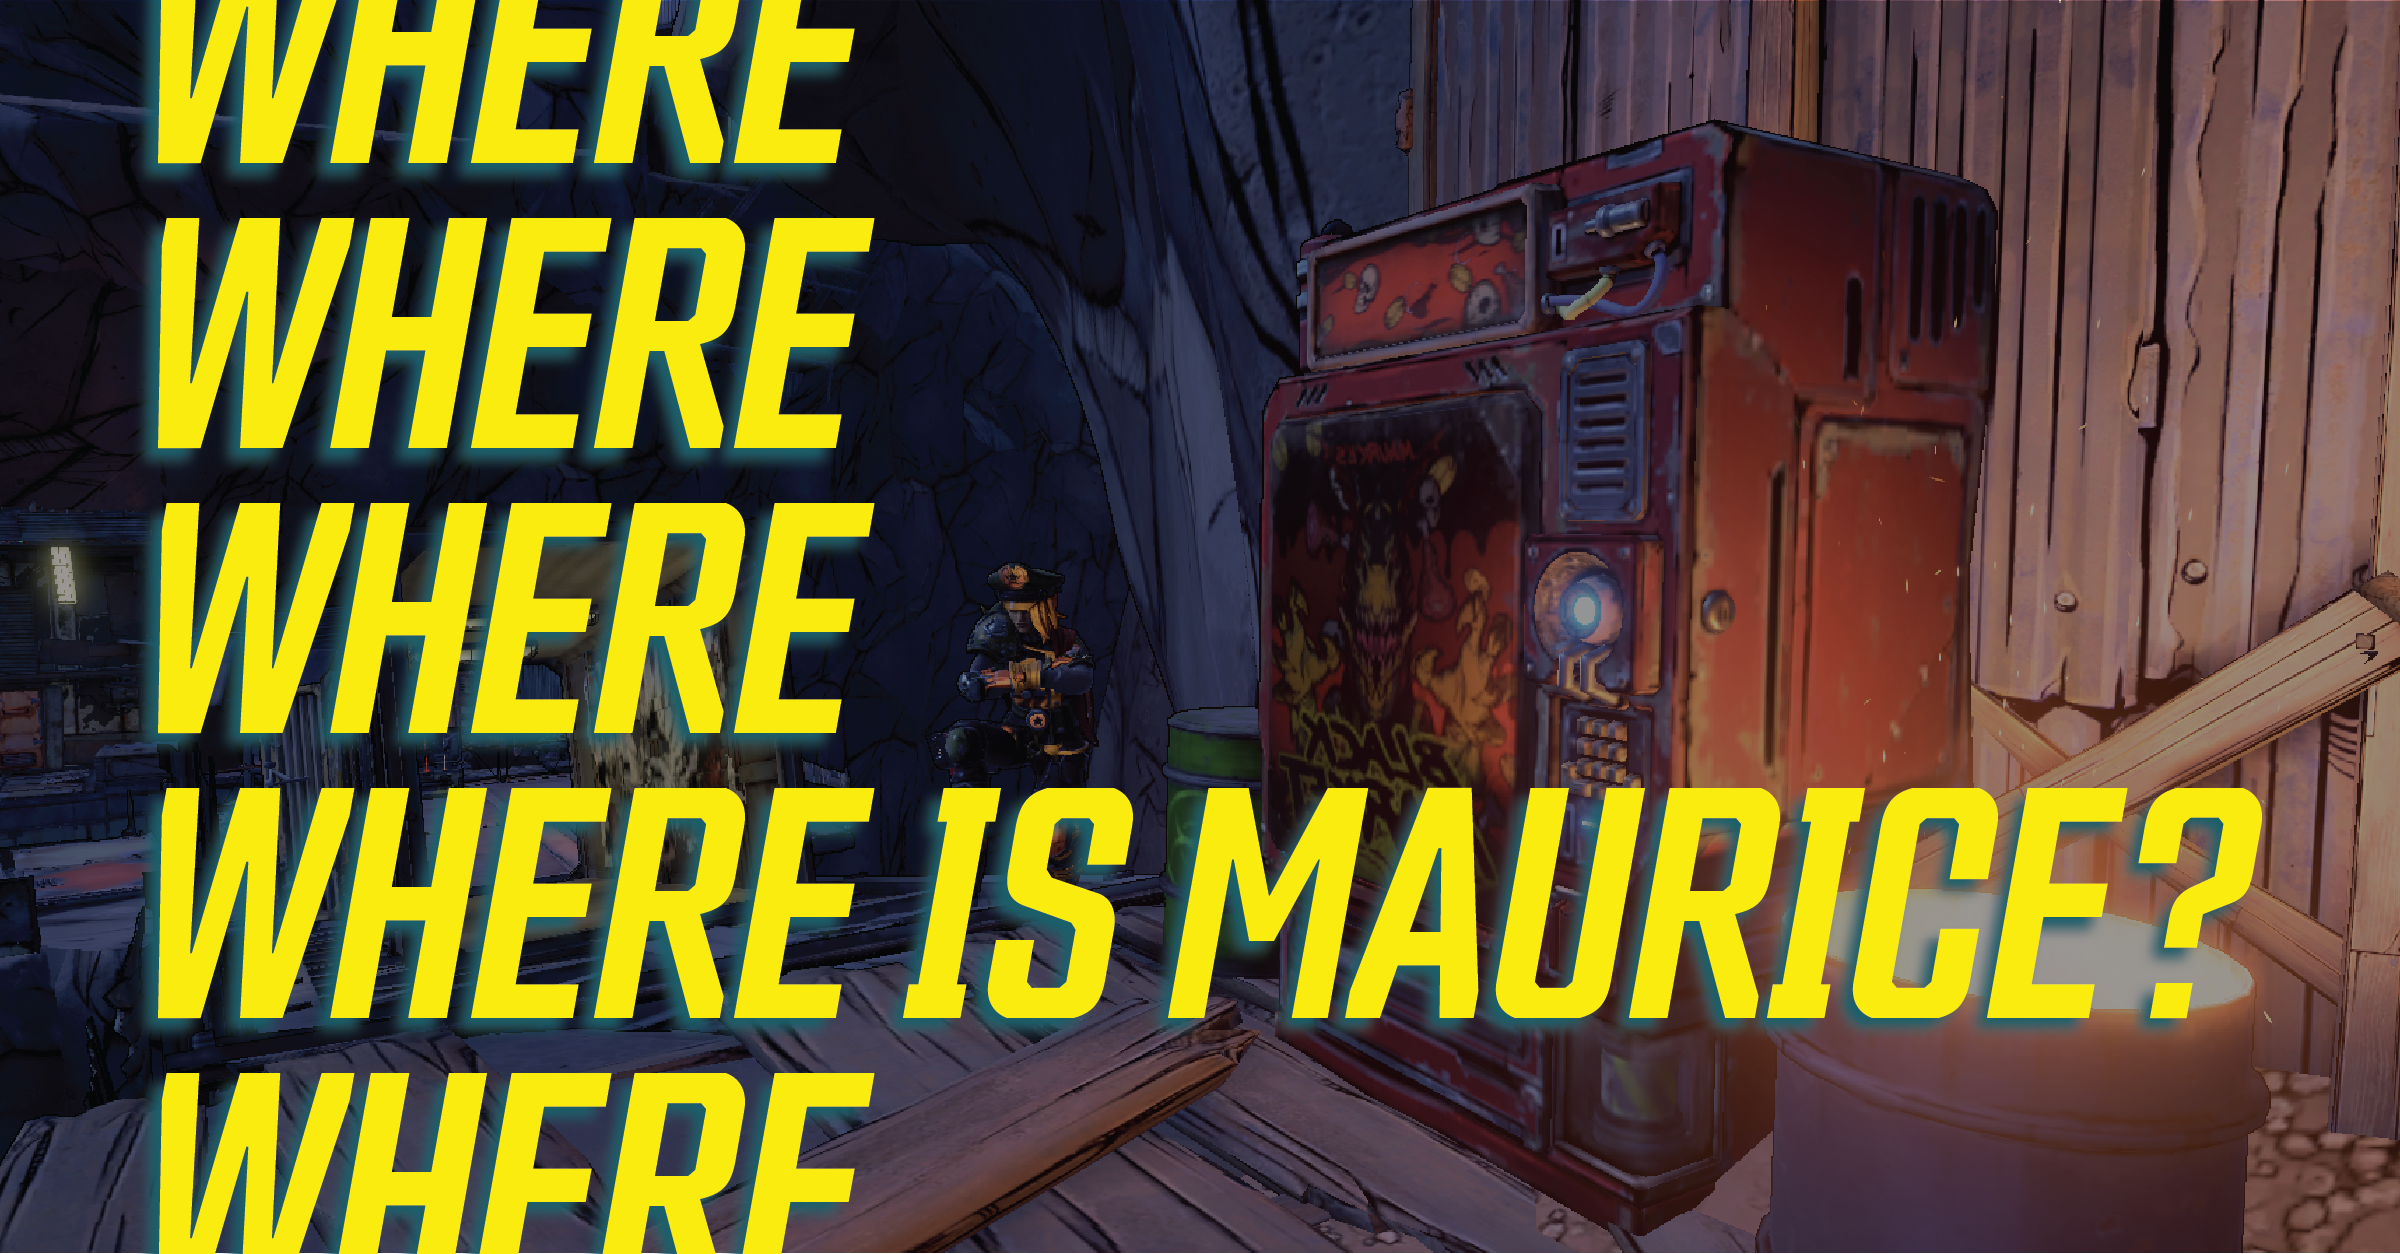 Where is Maurice?